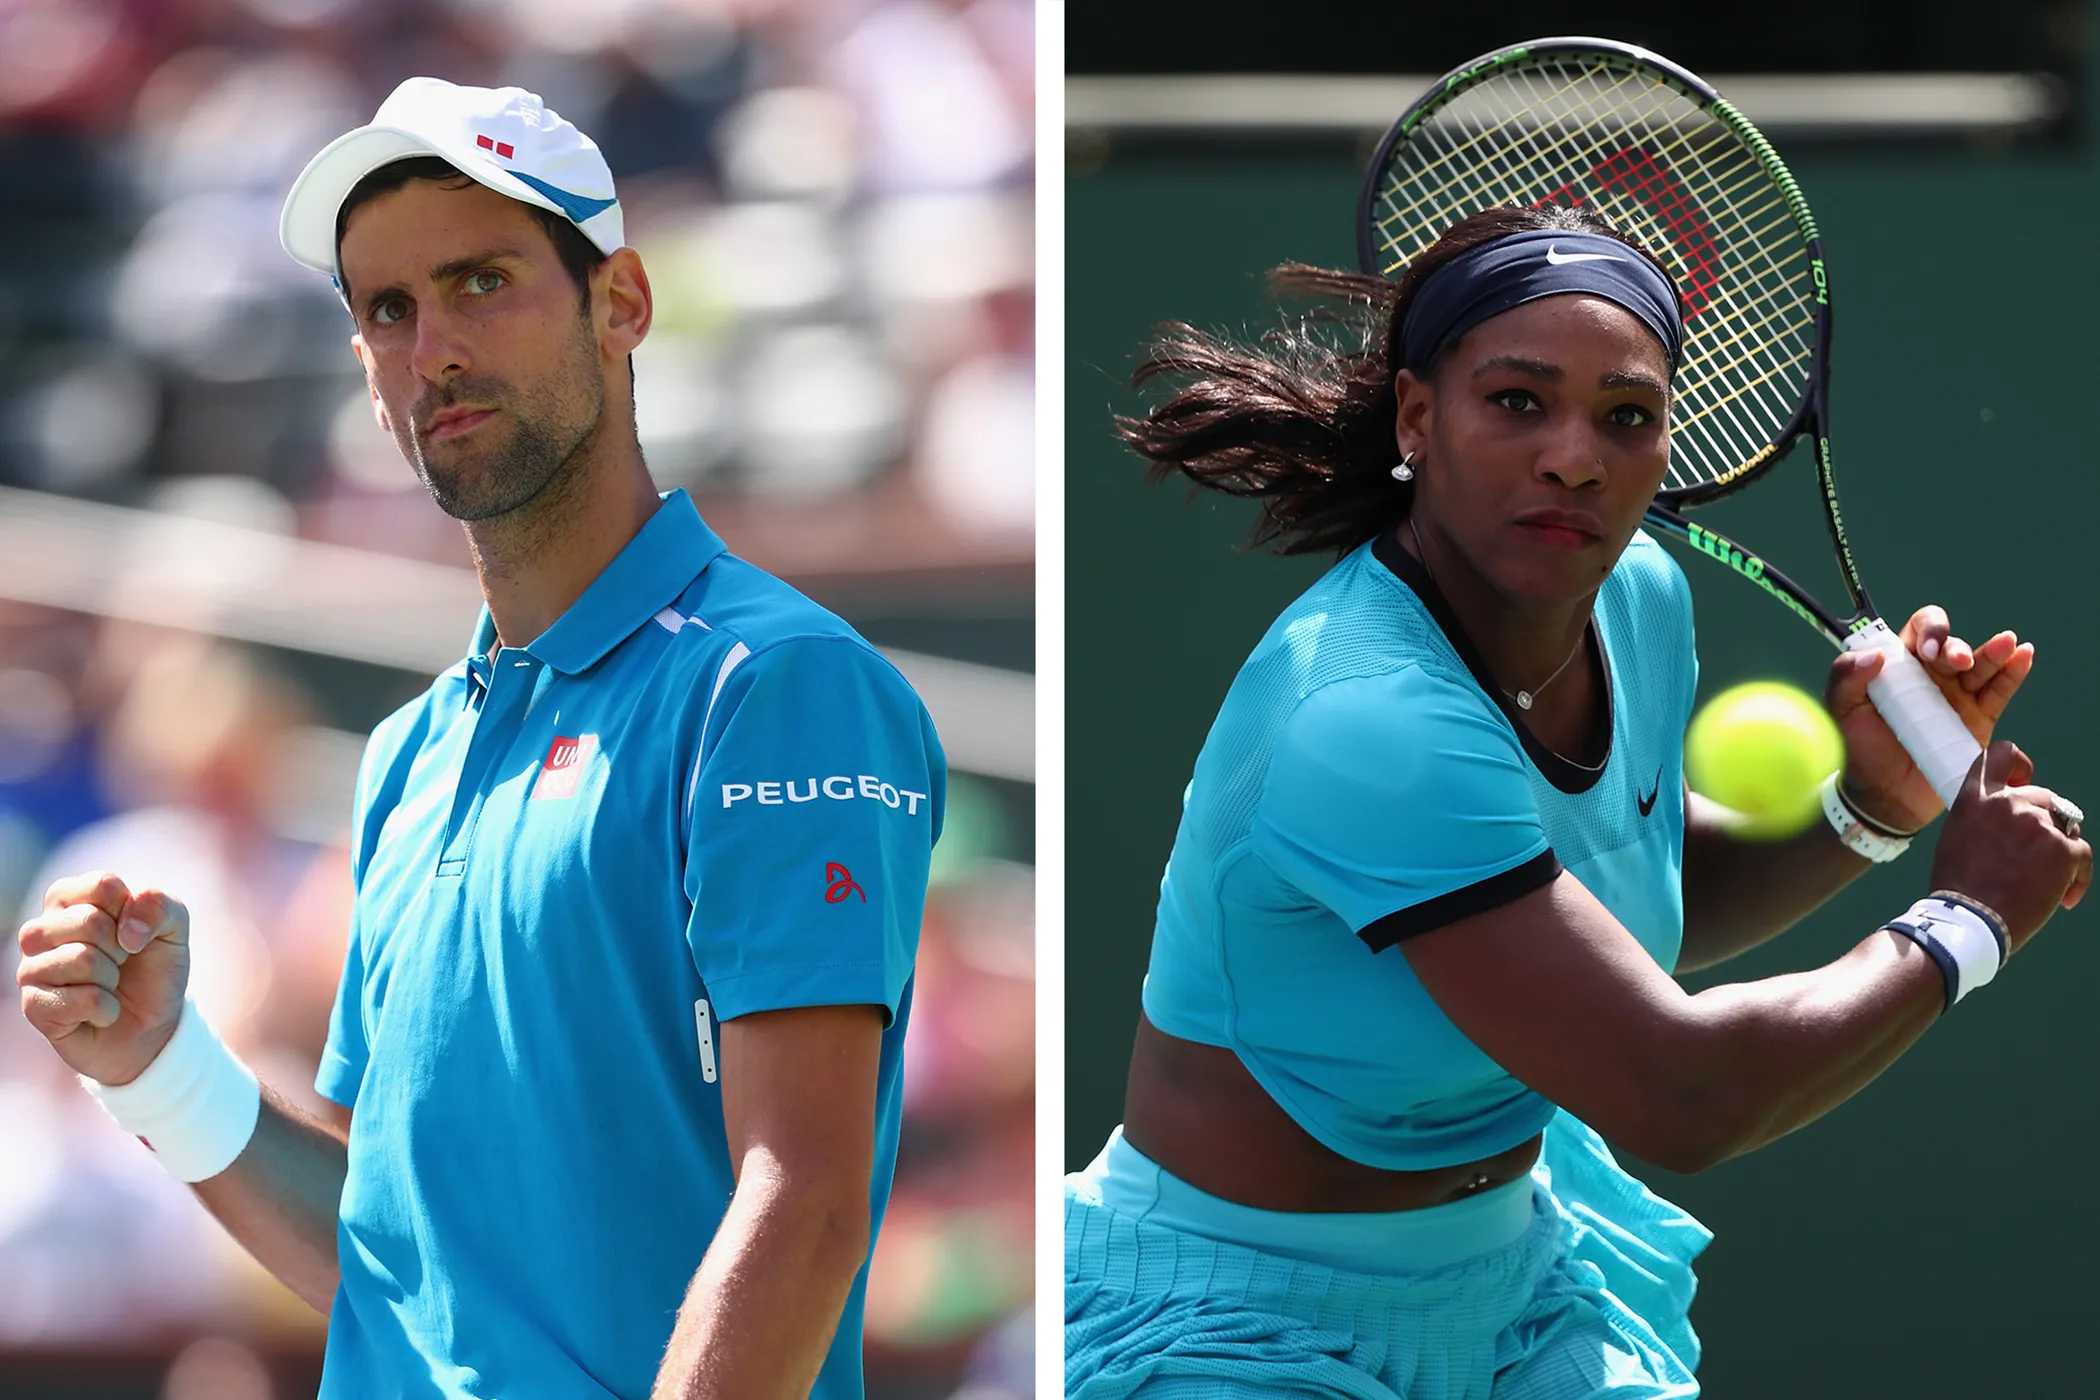 5 Reasons Why Tennis Should Keep Paying Men and Women Equally